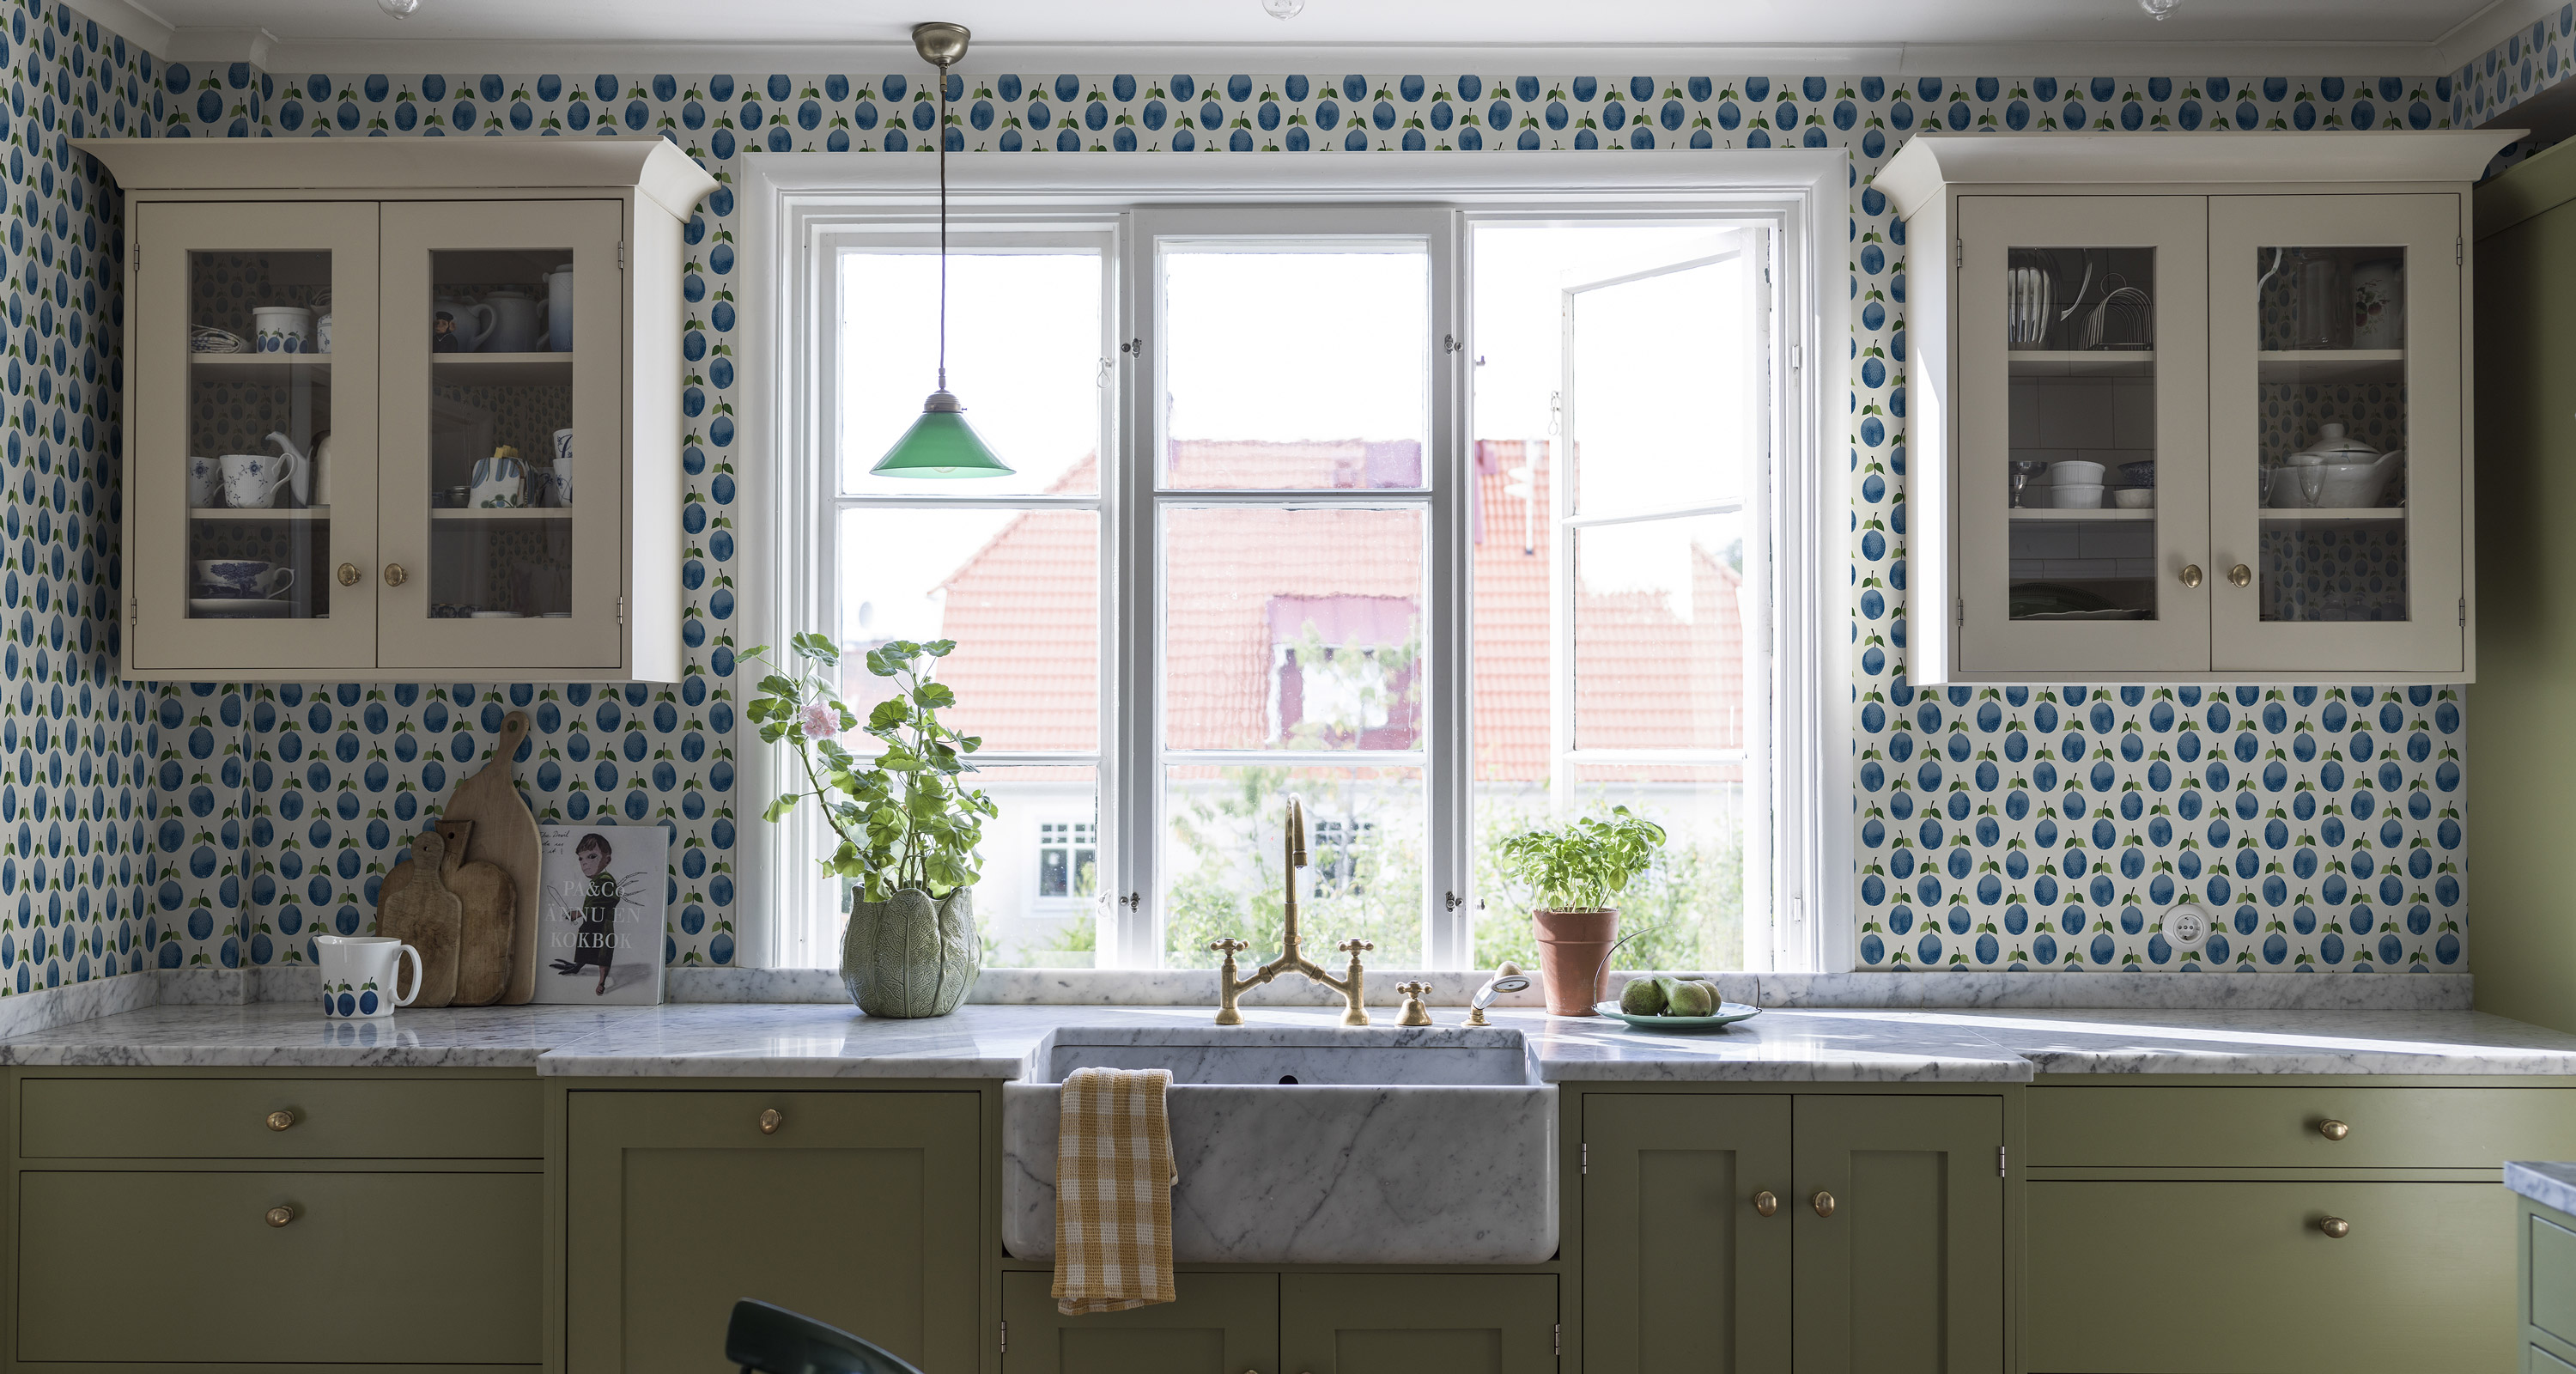 Kitchen wall decor ideas: Designs with paint, tiles & paper | Homes &  Gardens |